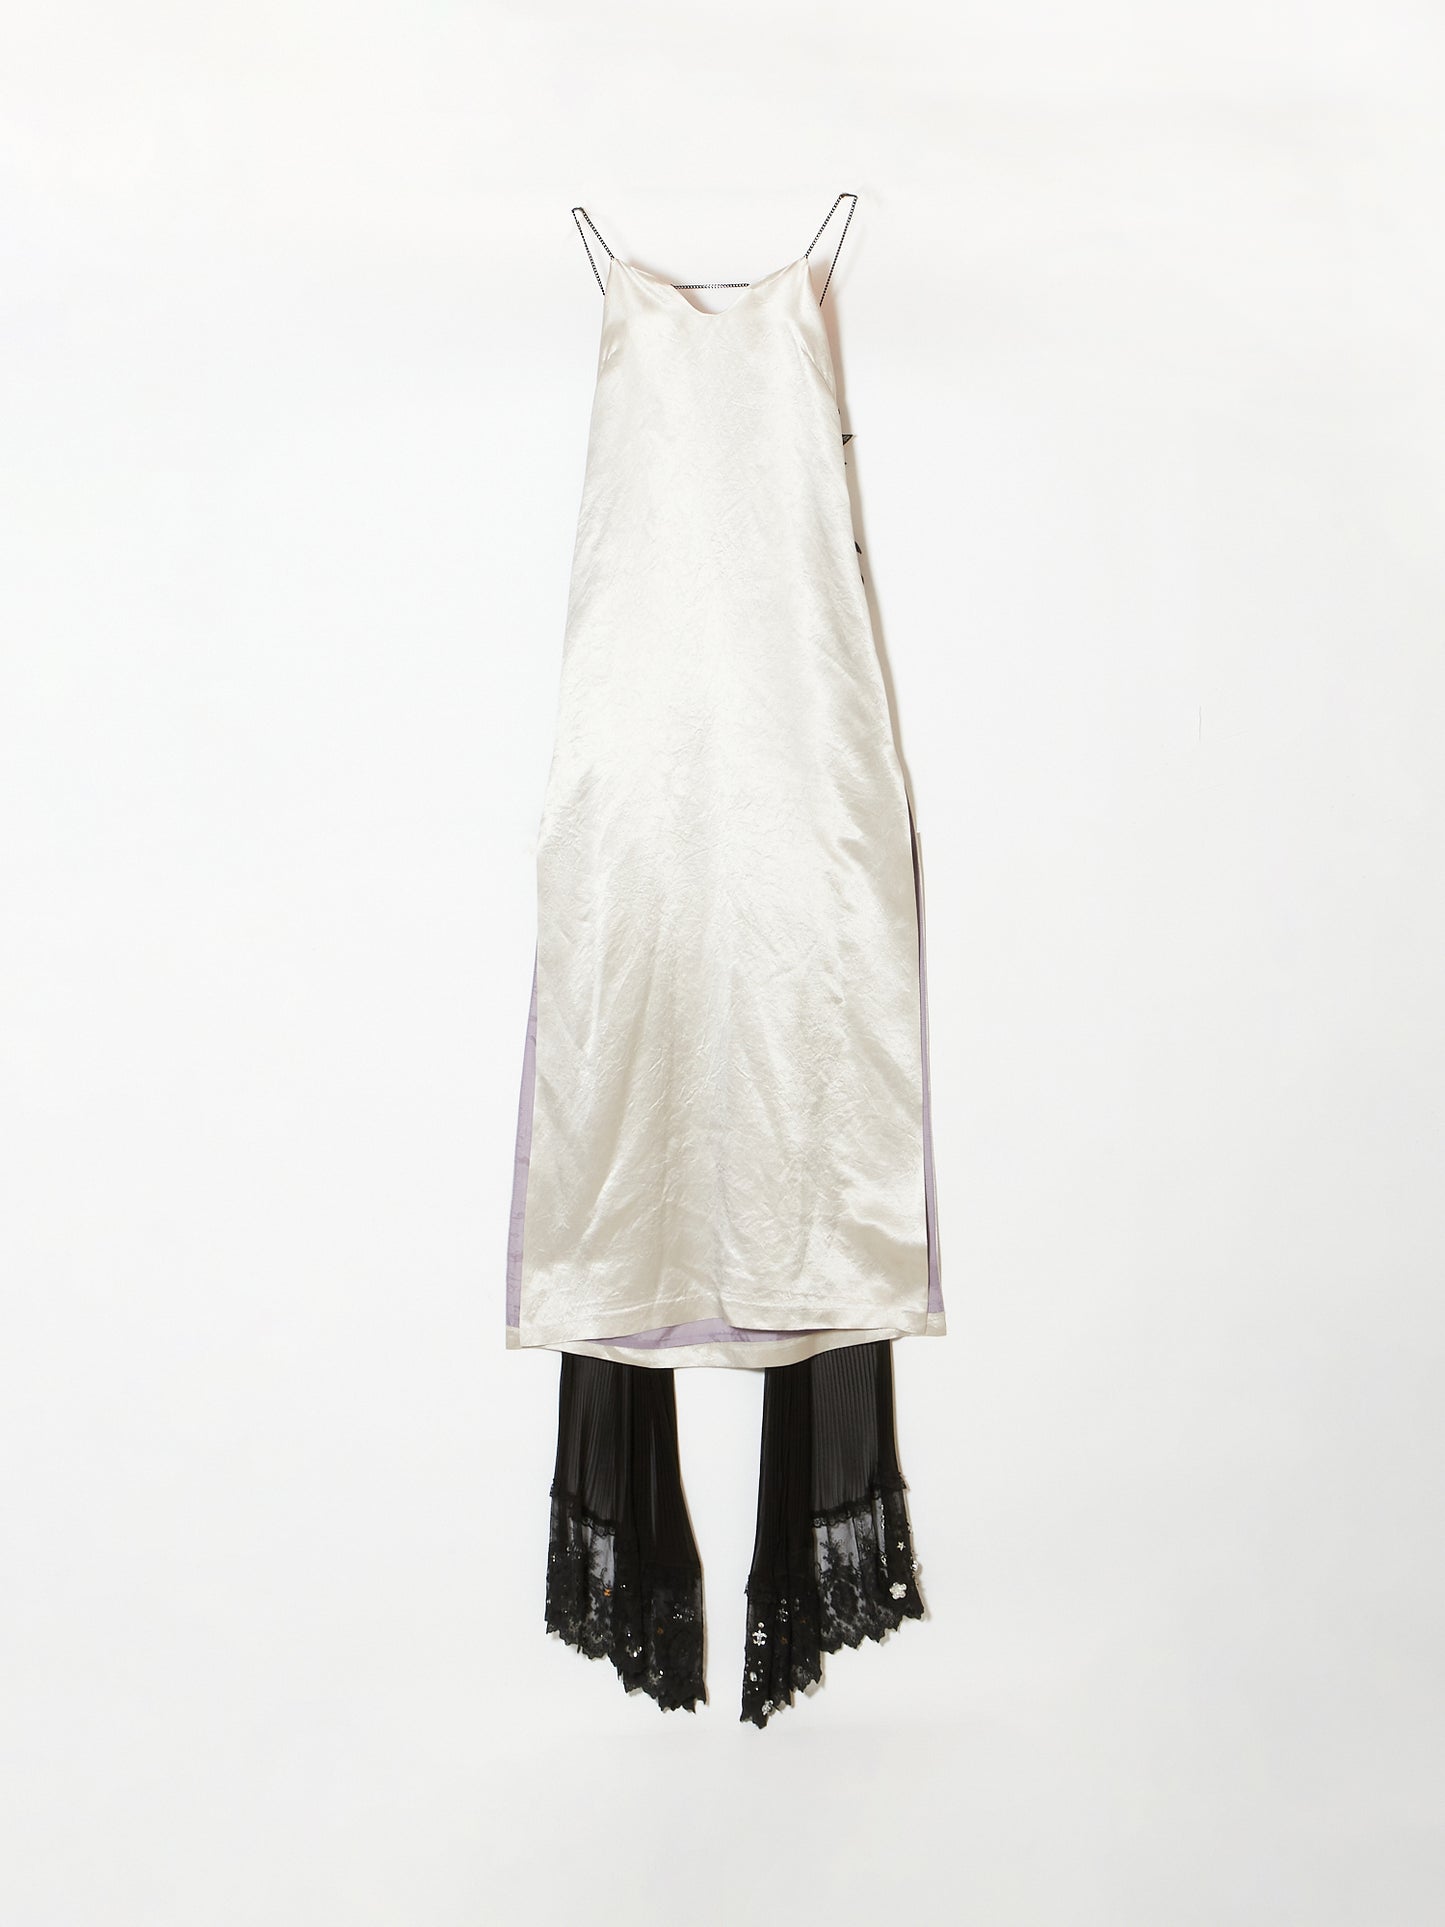 angel wing satin dress (silver)【Delivery in December】